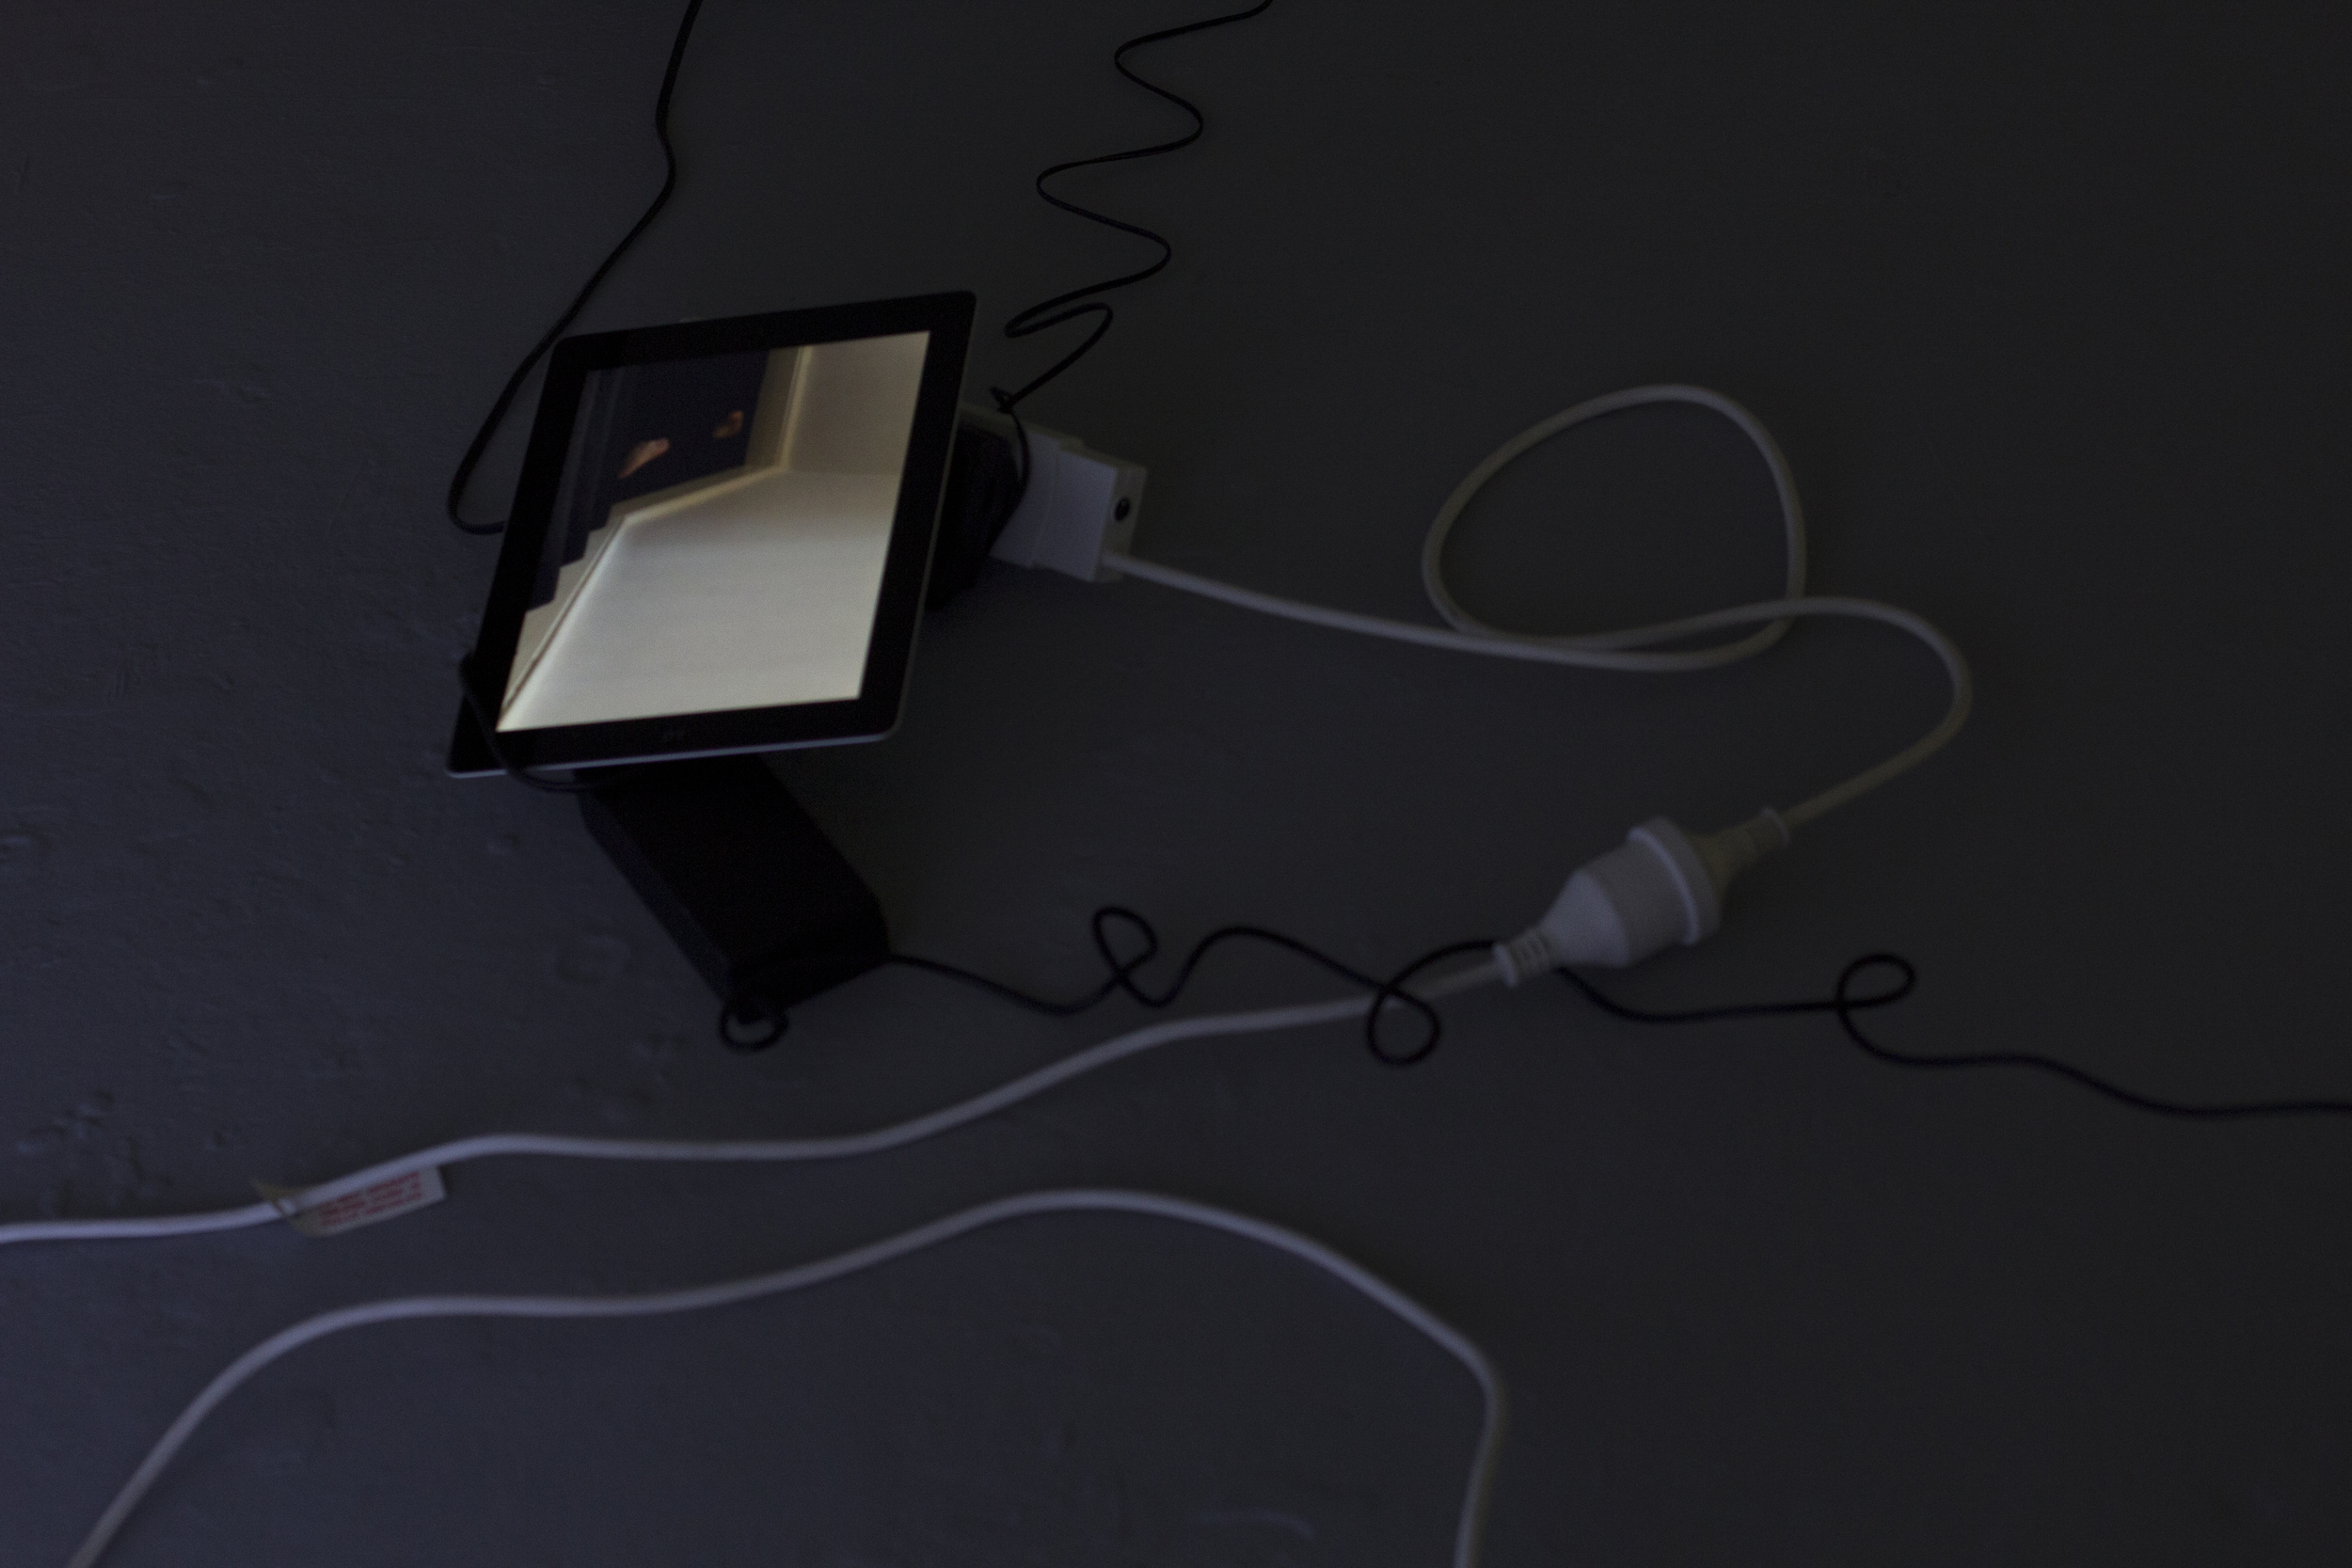    Suspended, &nbsp; 2015, 5 channel video installation, dimensions variable 